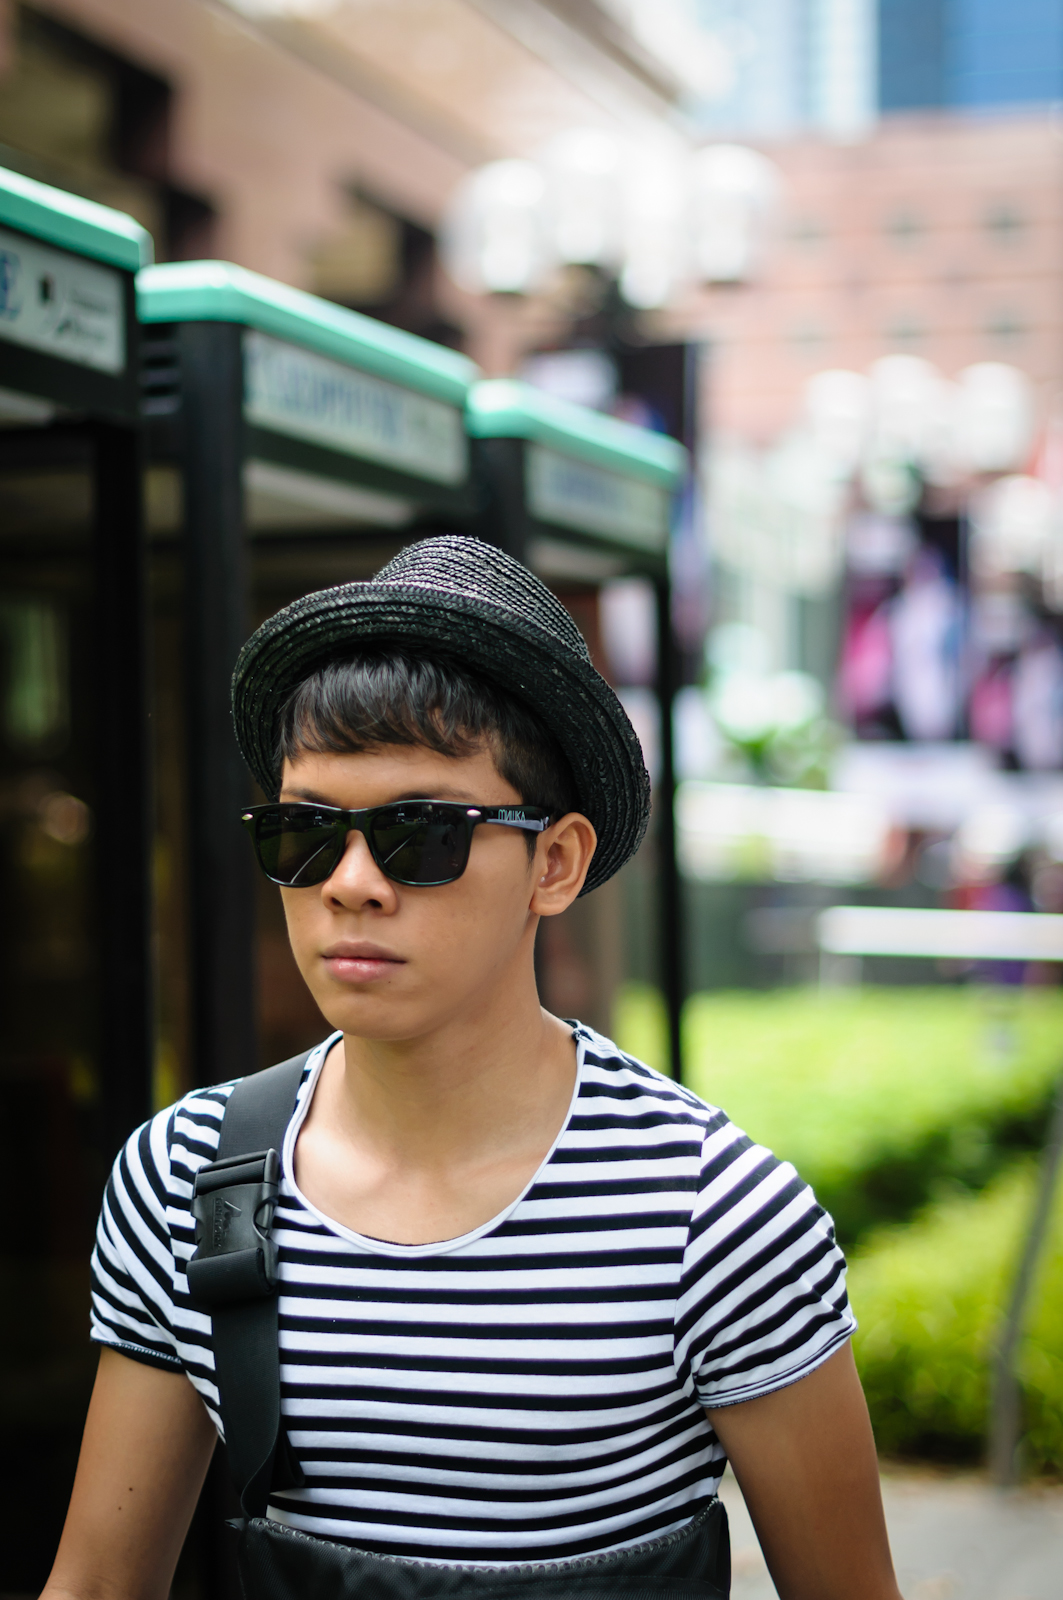 Street photography - man with a hat wearing shades and stripes